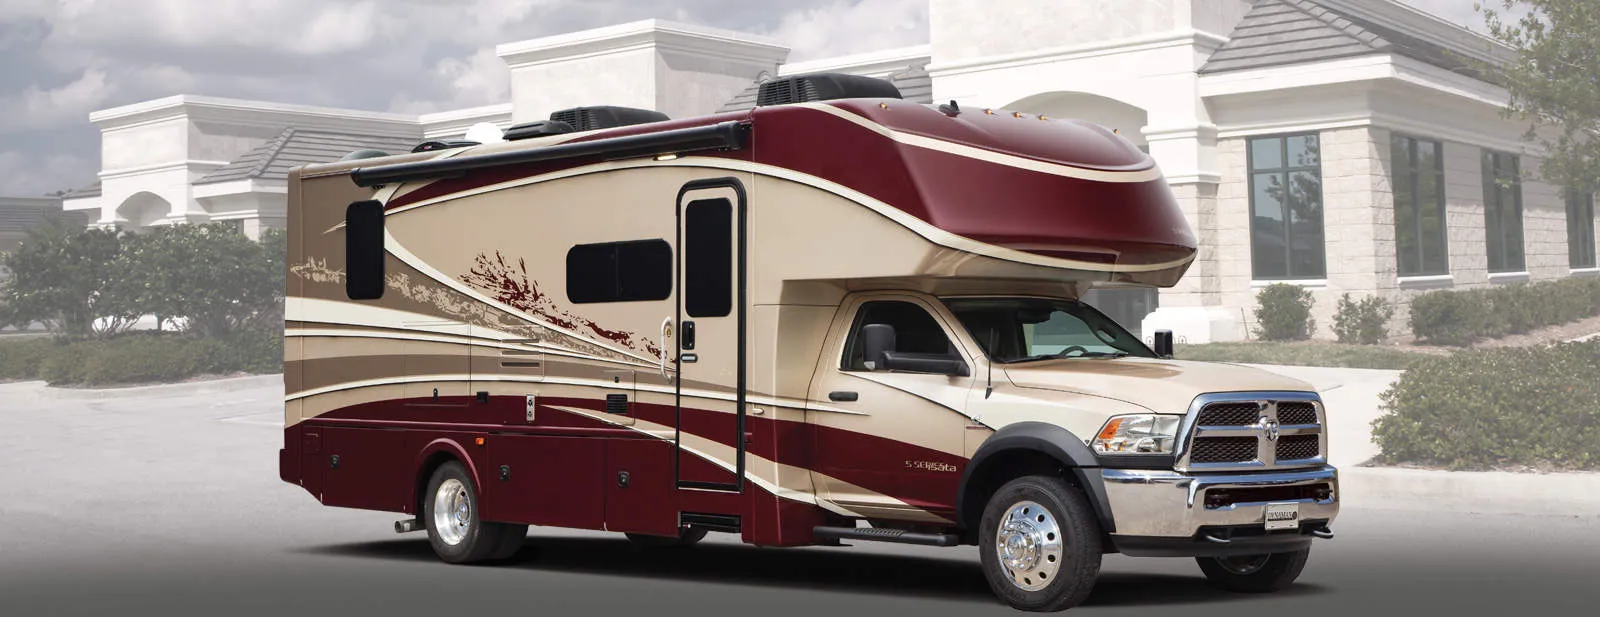 Class C Rvs With King Bed Floorplan, Used Rv With King Size Bed